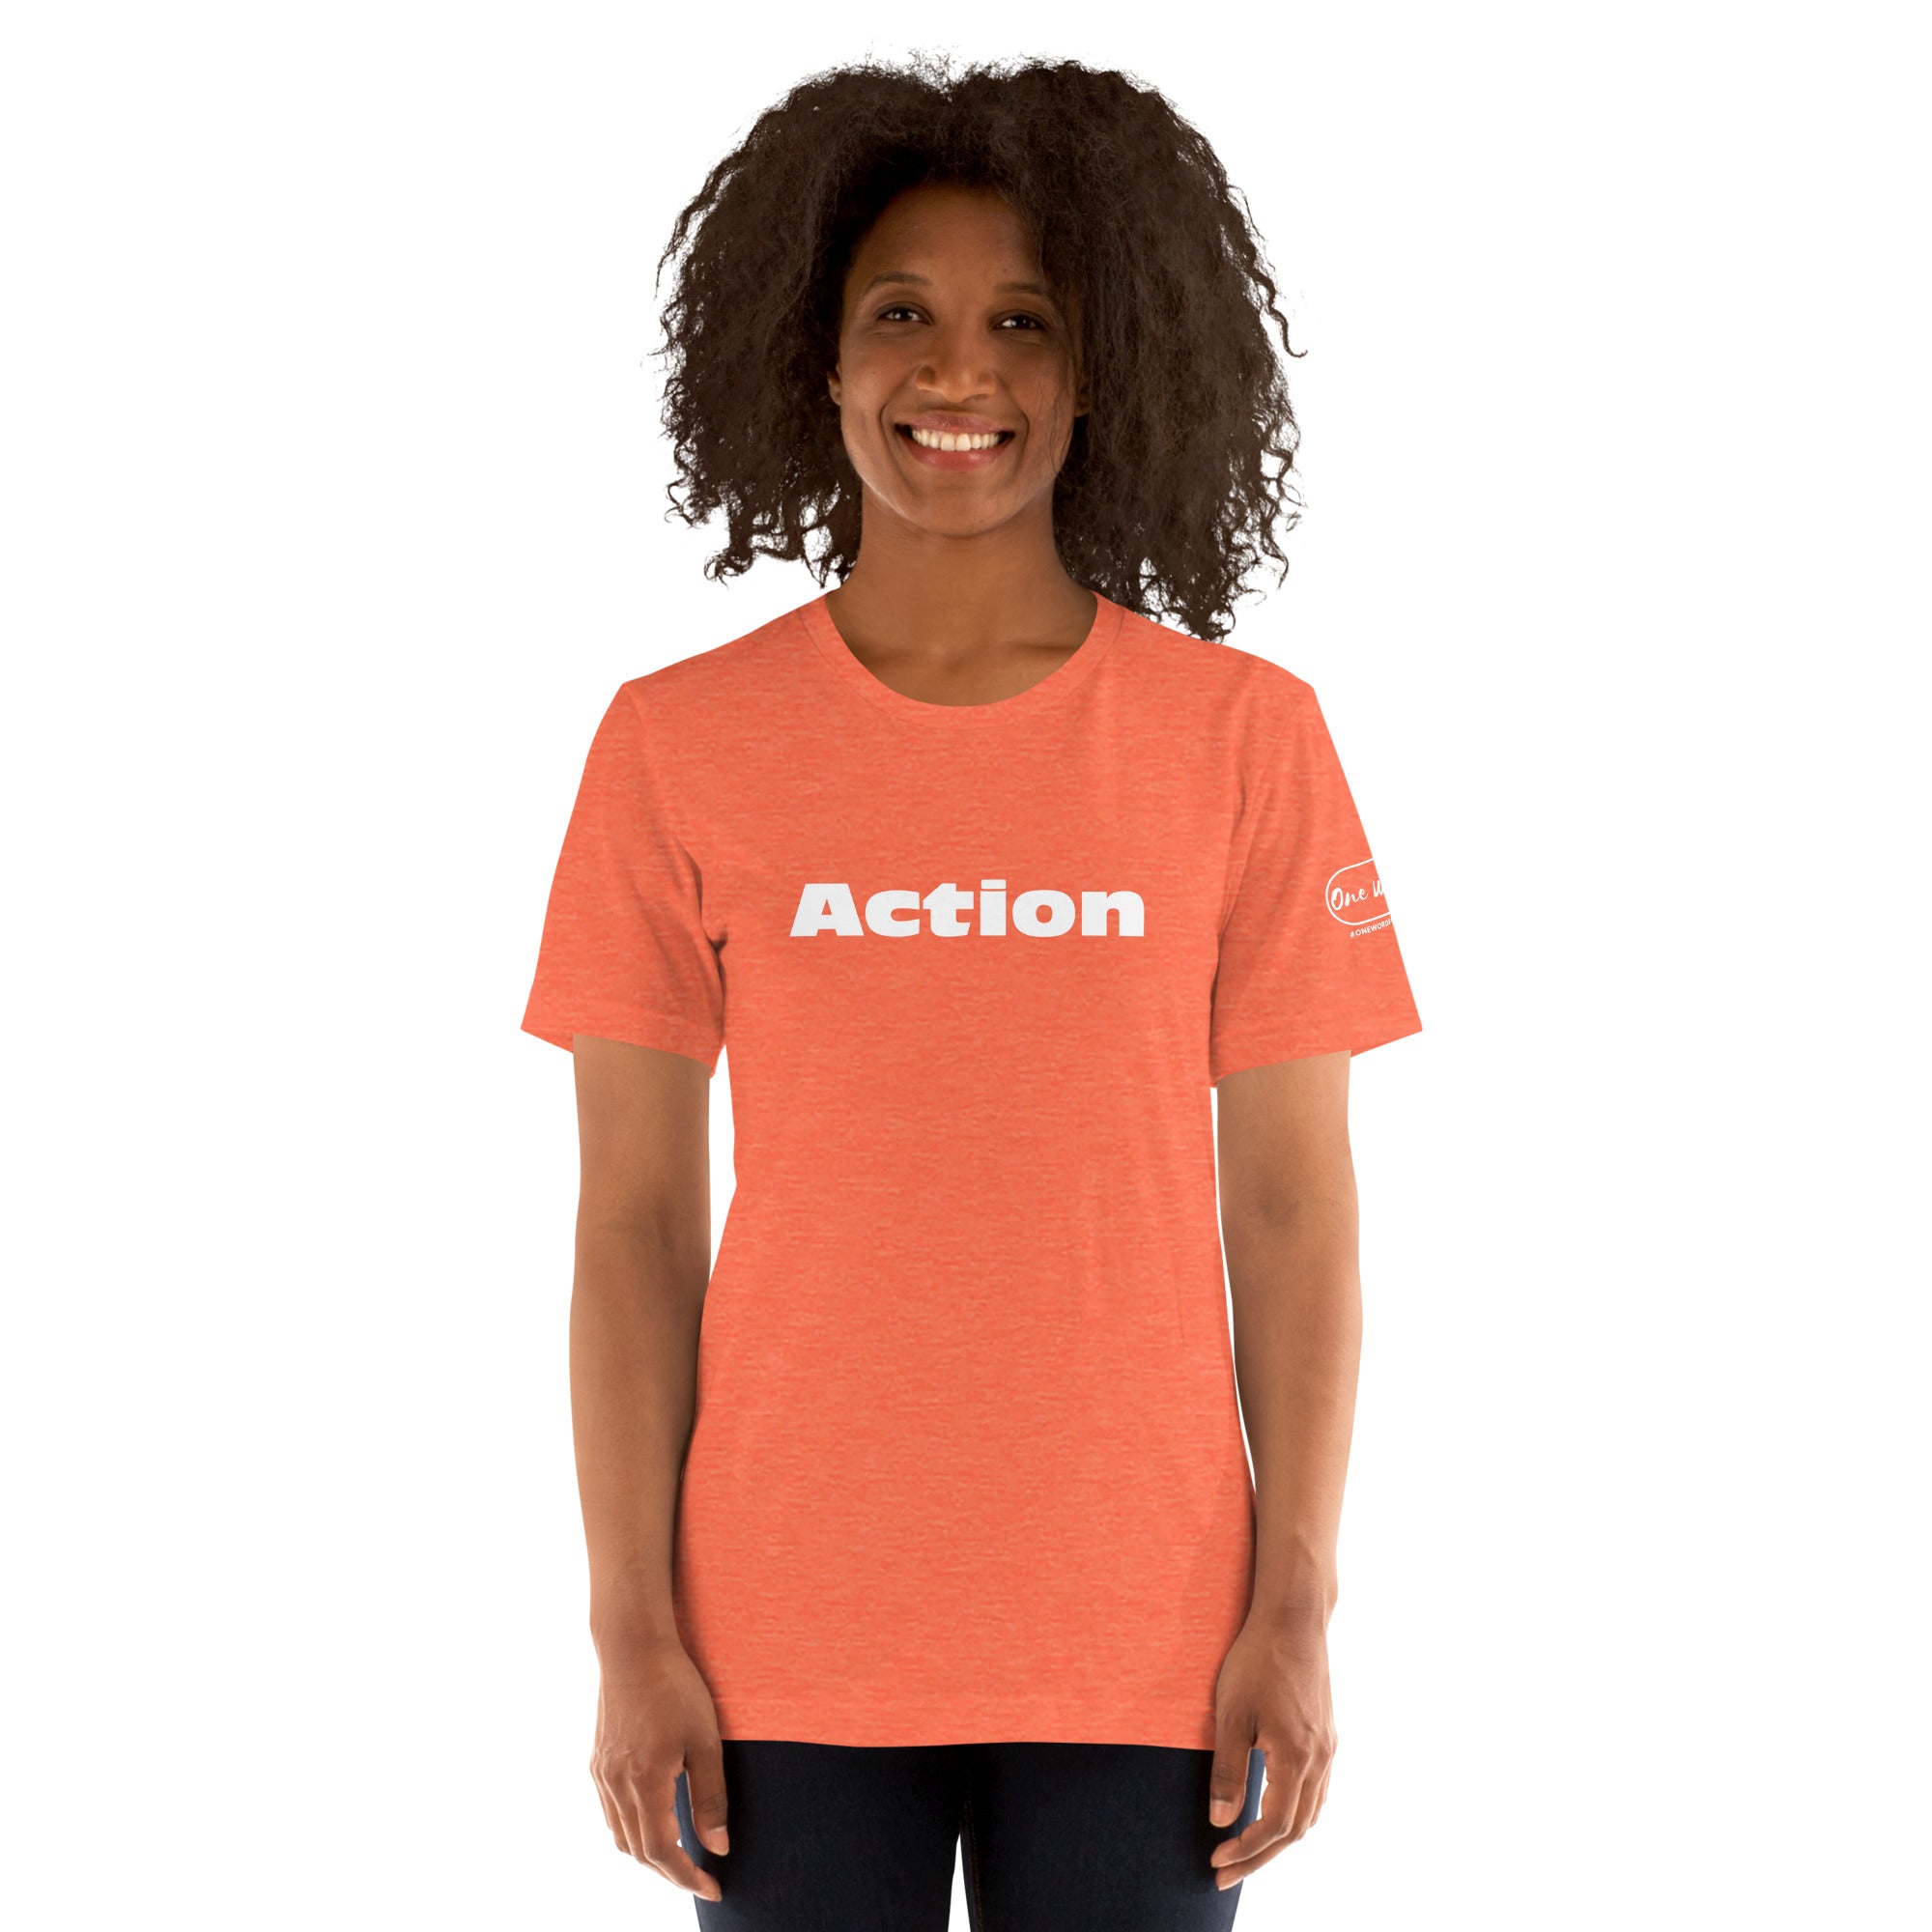 Action-Inspired T-shirt | Faith Apparel | One-Word Unisex T-shirt